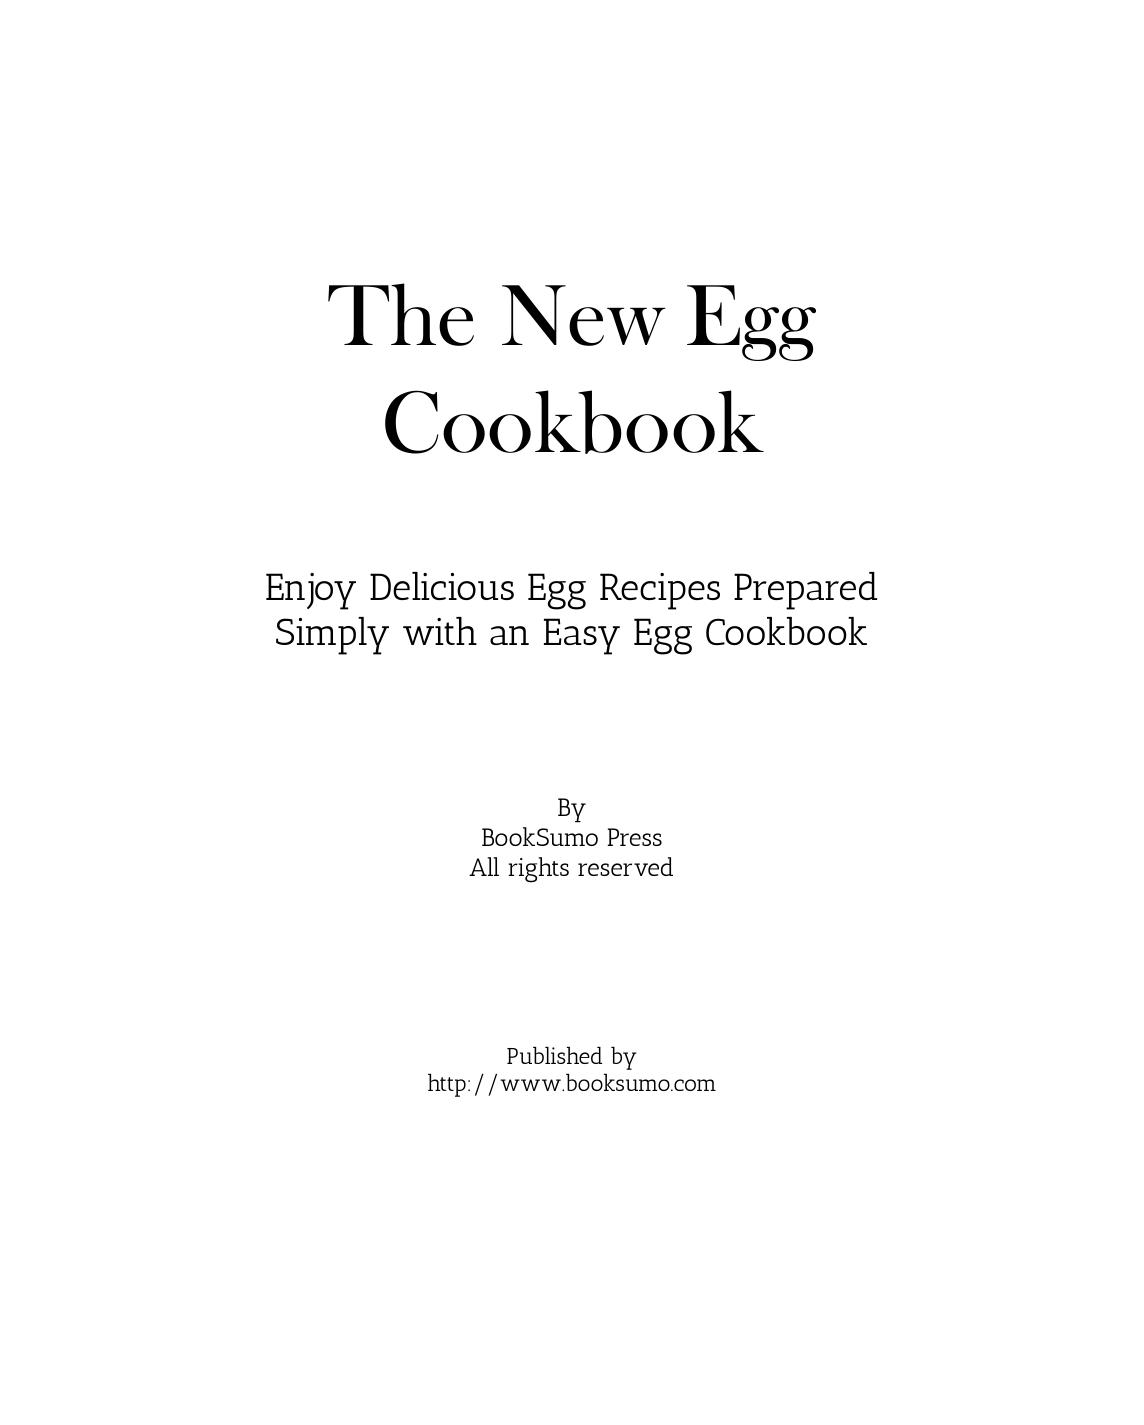 The New Egg Cookbook: Enjoy Delicious Breakfast Recipes Prepared Simply with an Easy Egg Cookbook by BookSumo Press